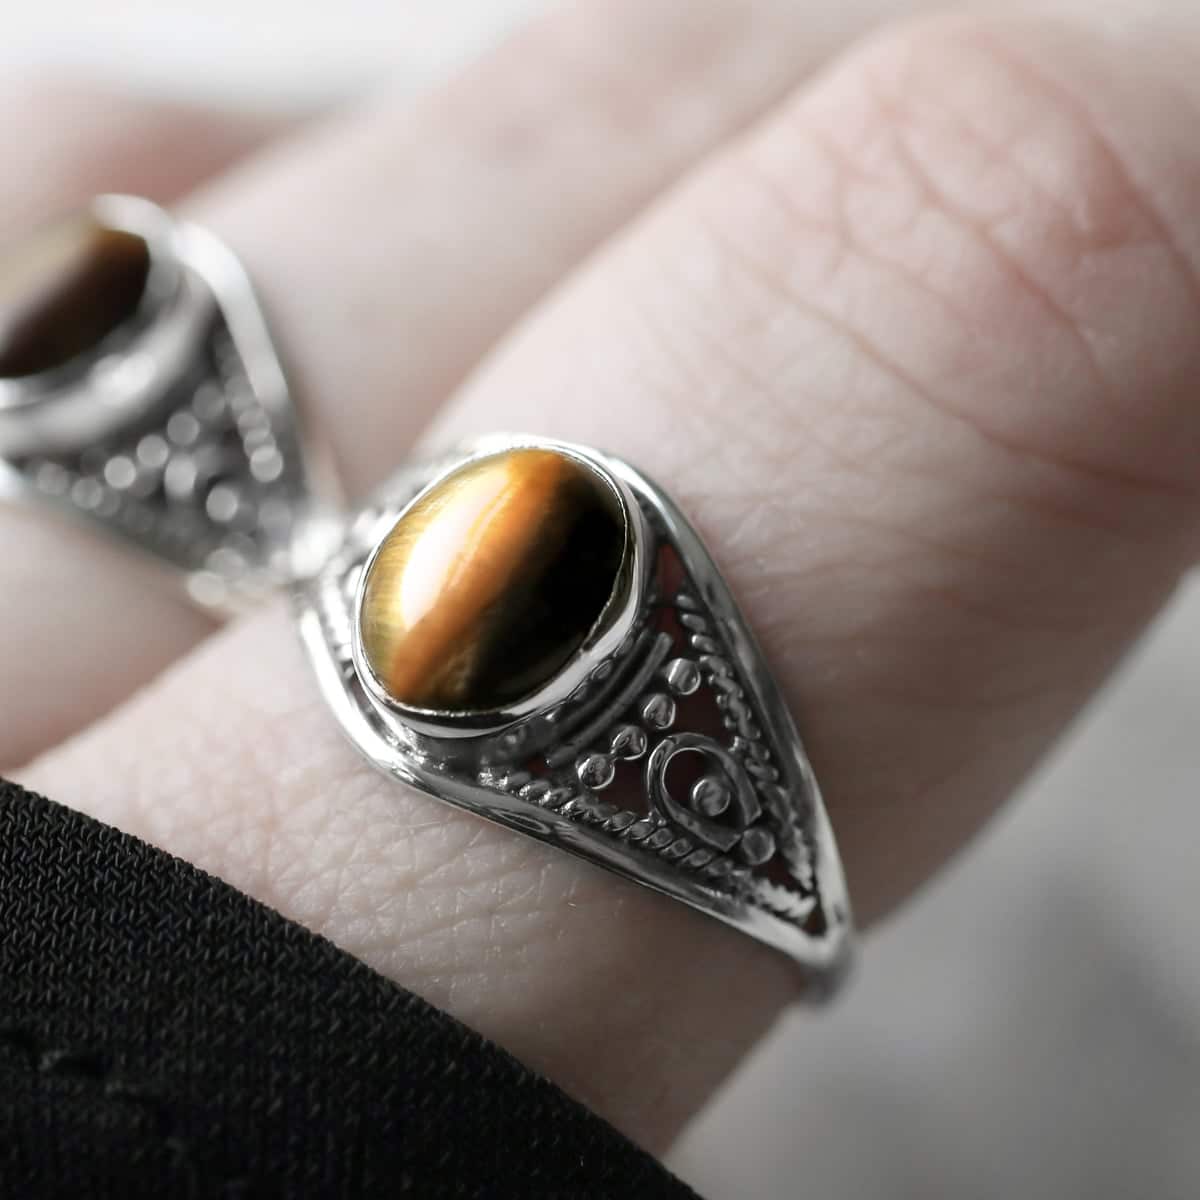 Aelia Tiger Eye Silver Ring Hellaholics,How To Make An Origami Rose Step By Step